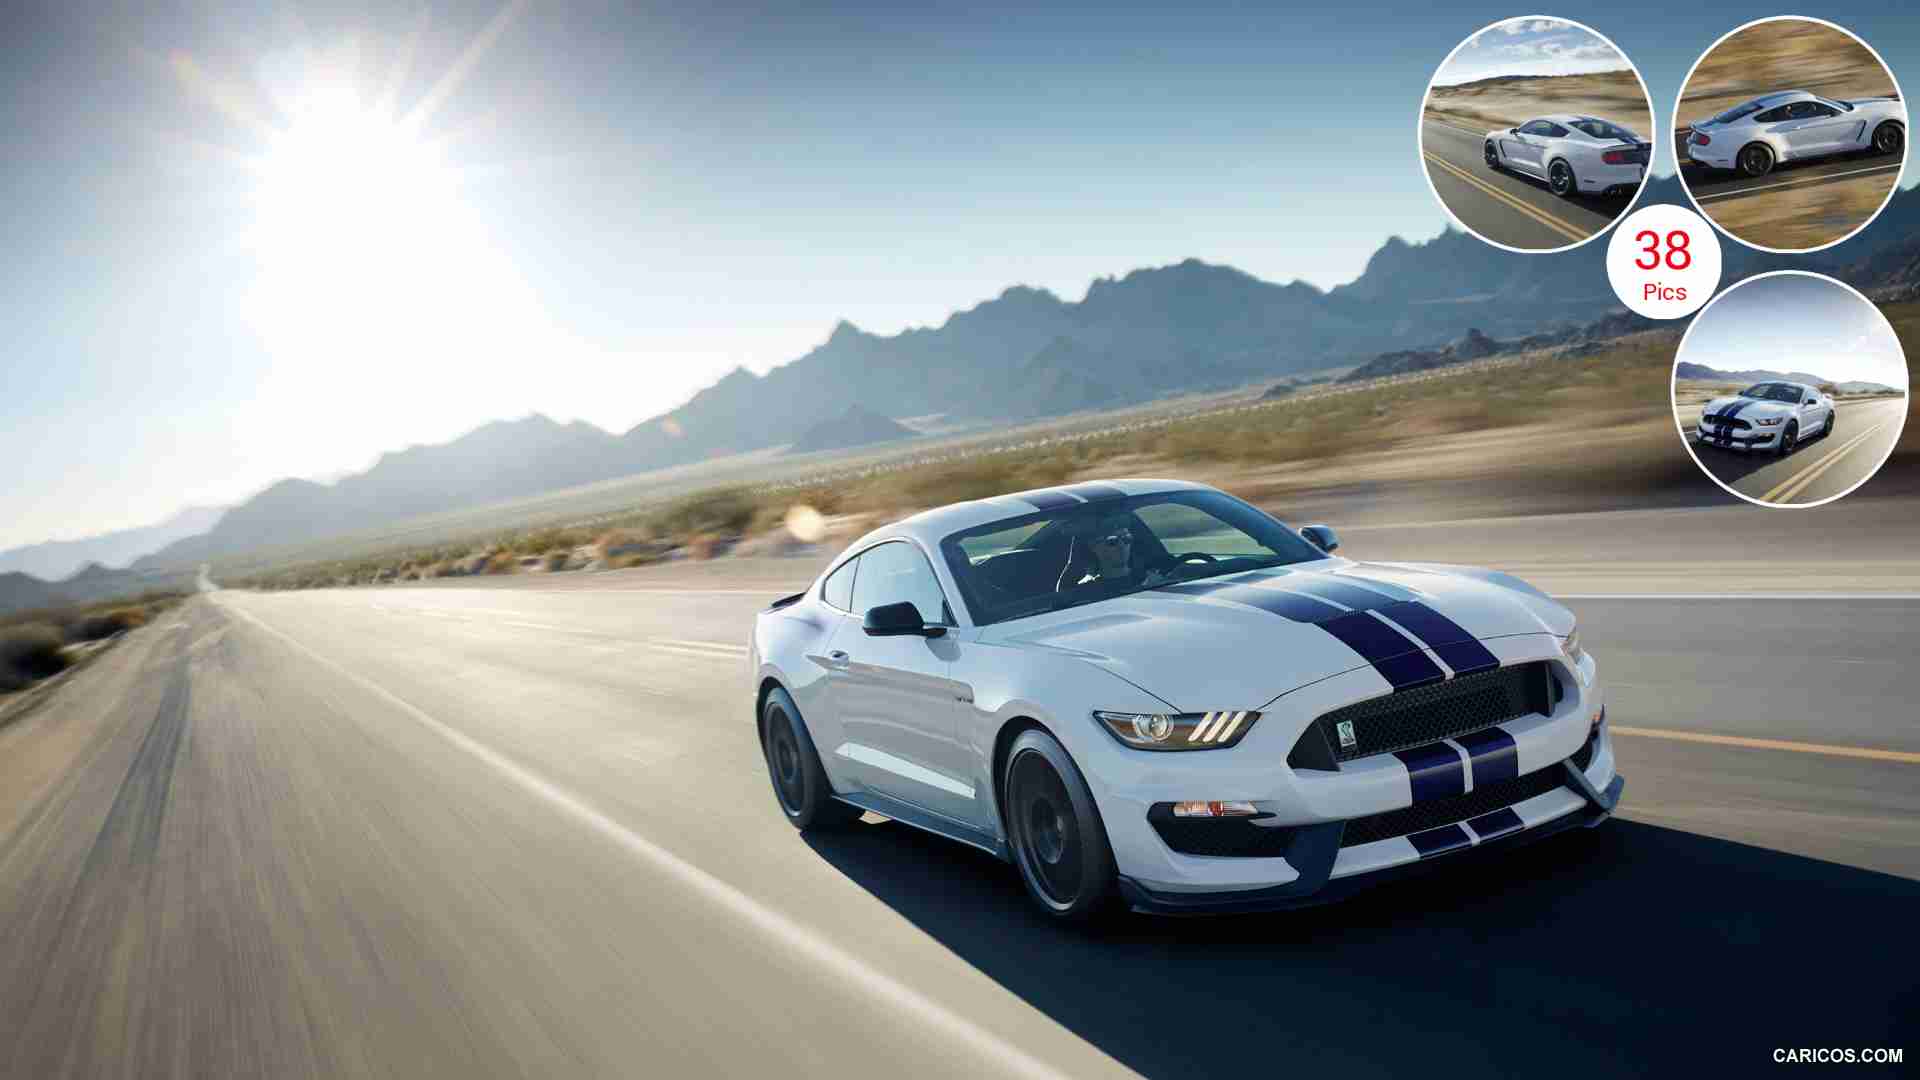 2016 Ford Mustang Shelby GT350 - Front HD Wallpaper 1920x1080